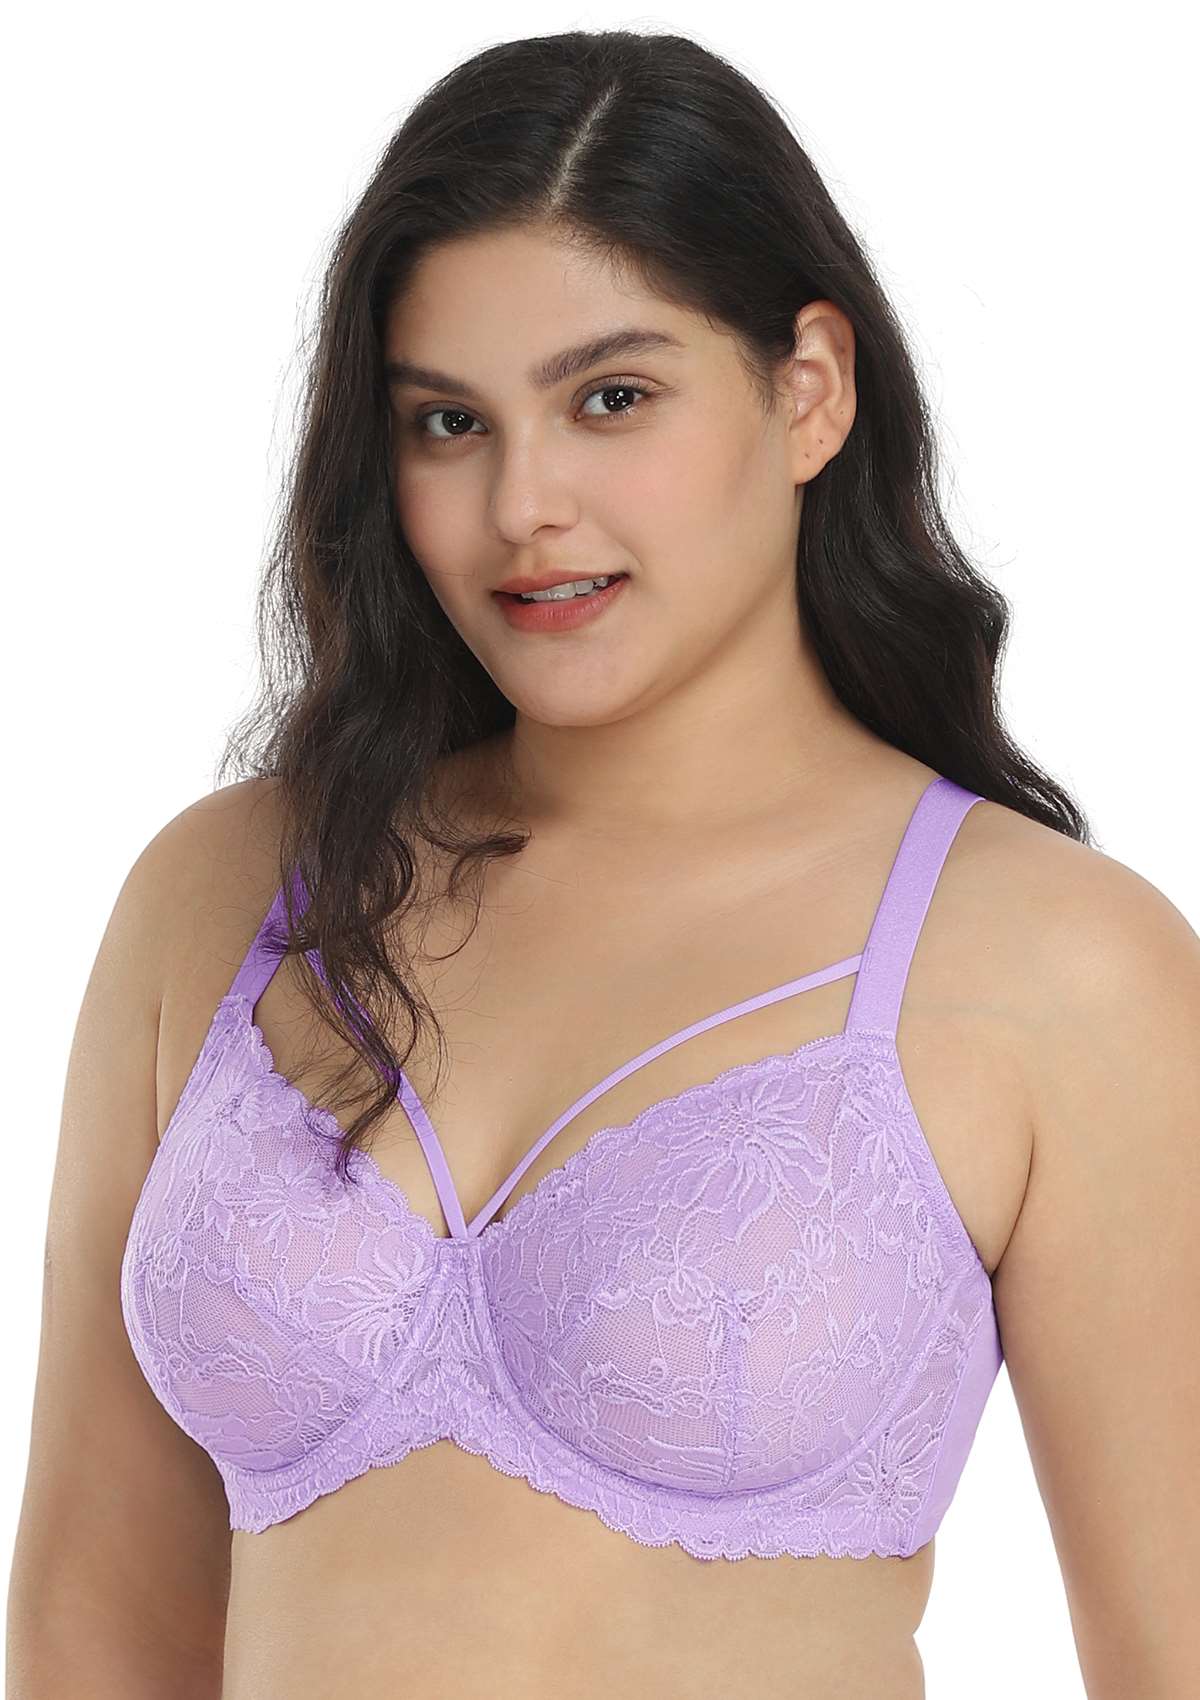 HSIA Pretty In Petals See-Through Lace Bra: Lift And Separate - Purple / 44 / C